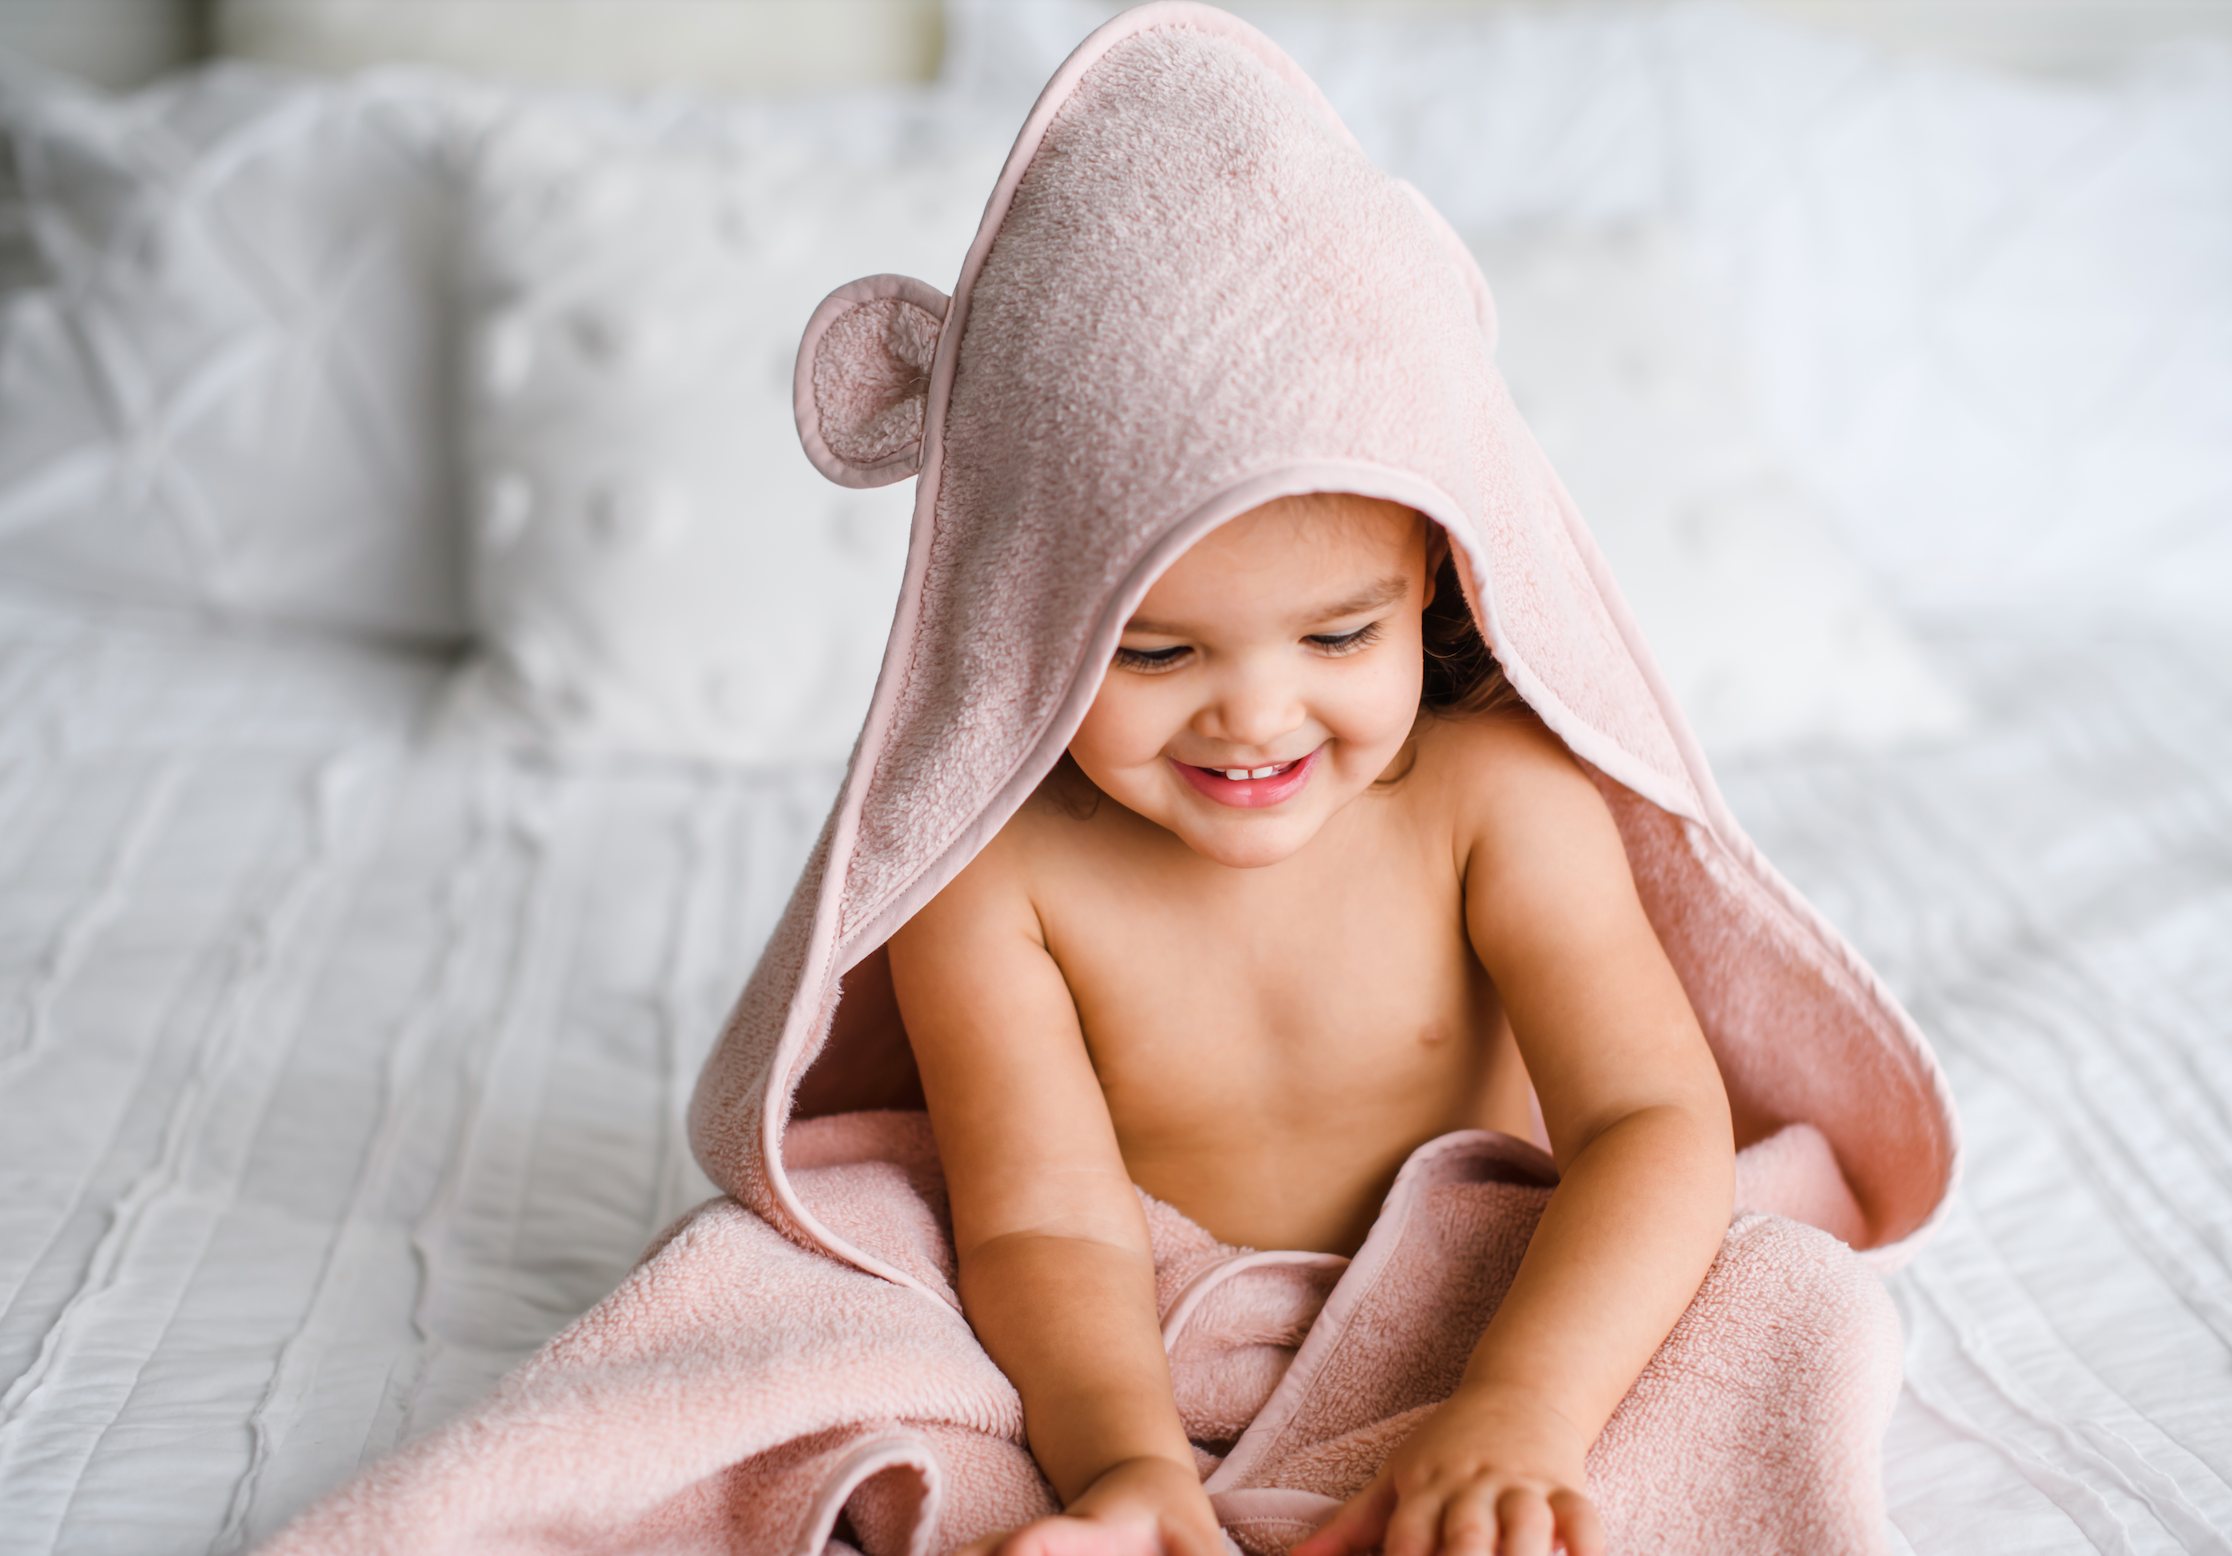 What Should You Know if You're Buying a Baby Towel